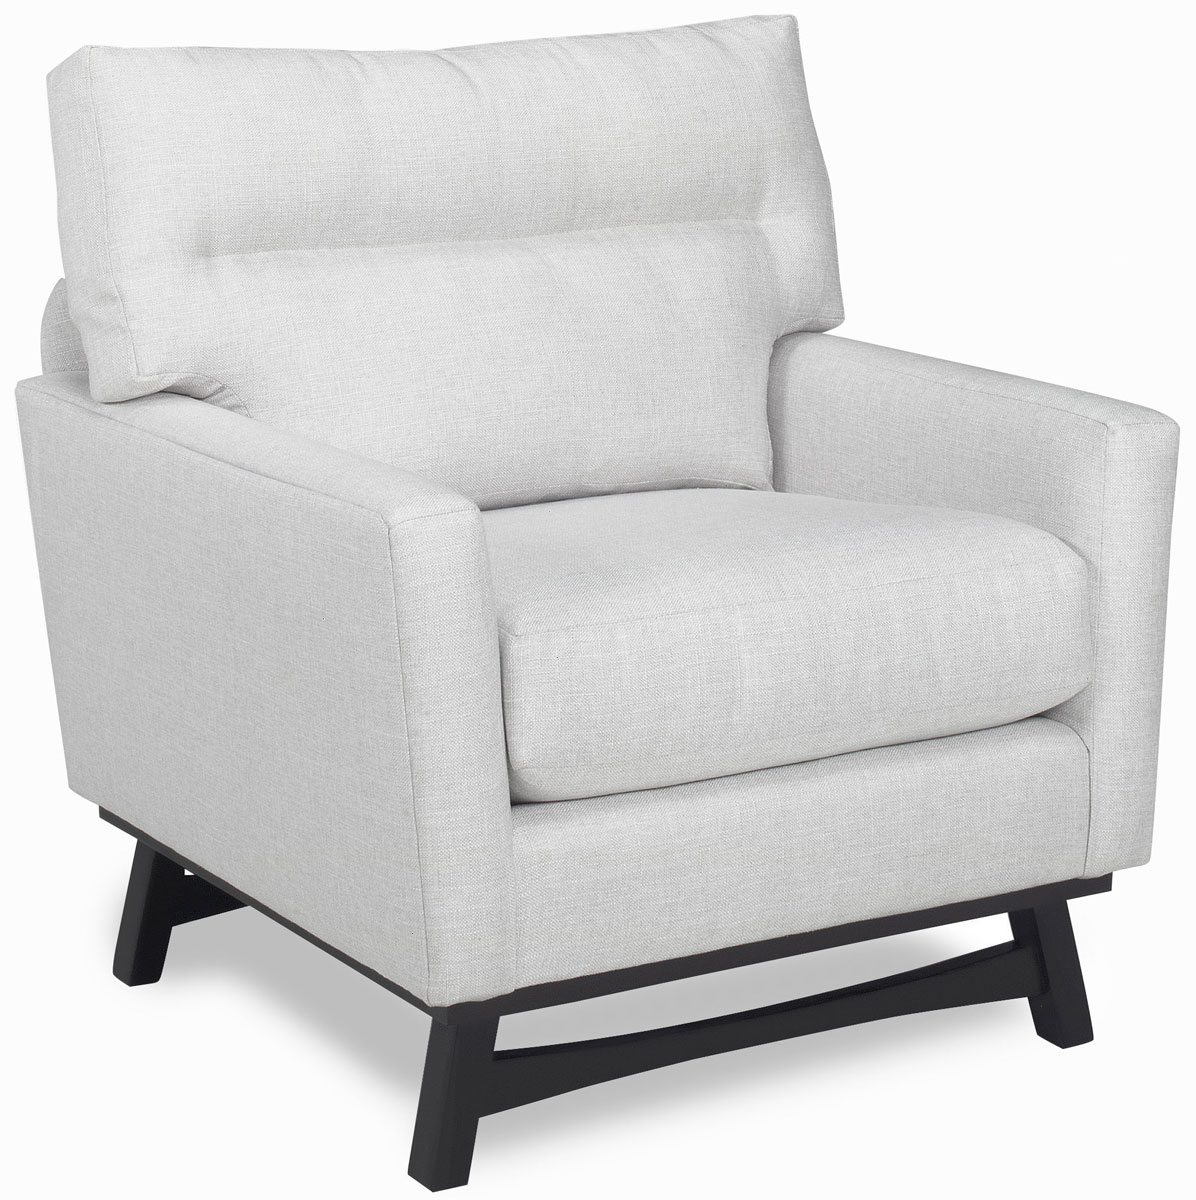 Temple Furniture 17955 Levi Chair